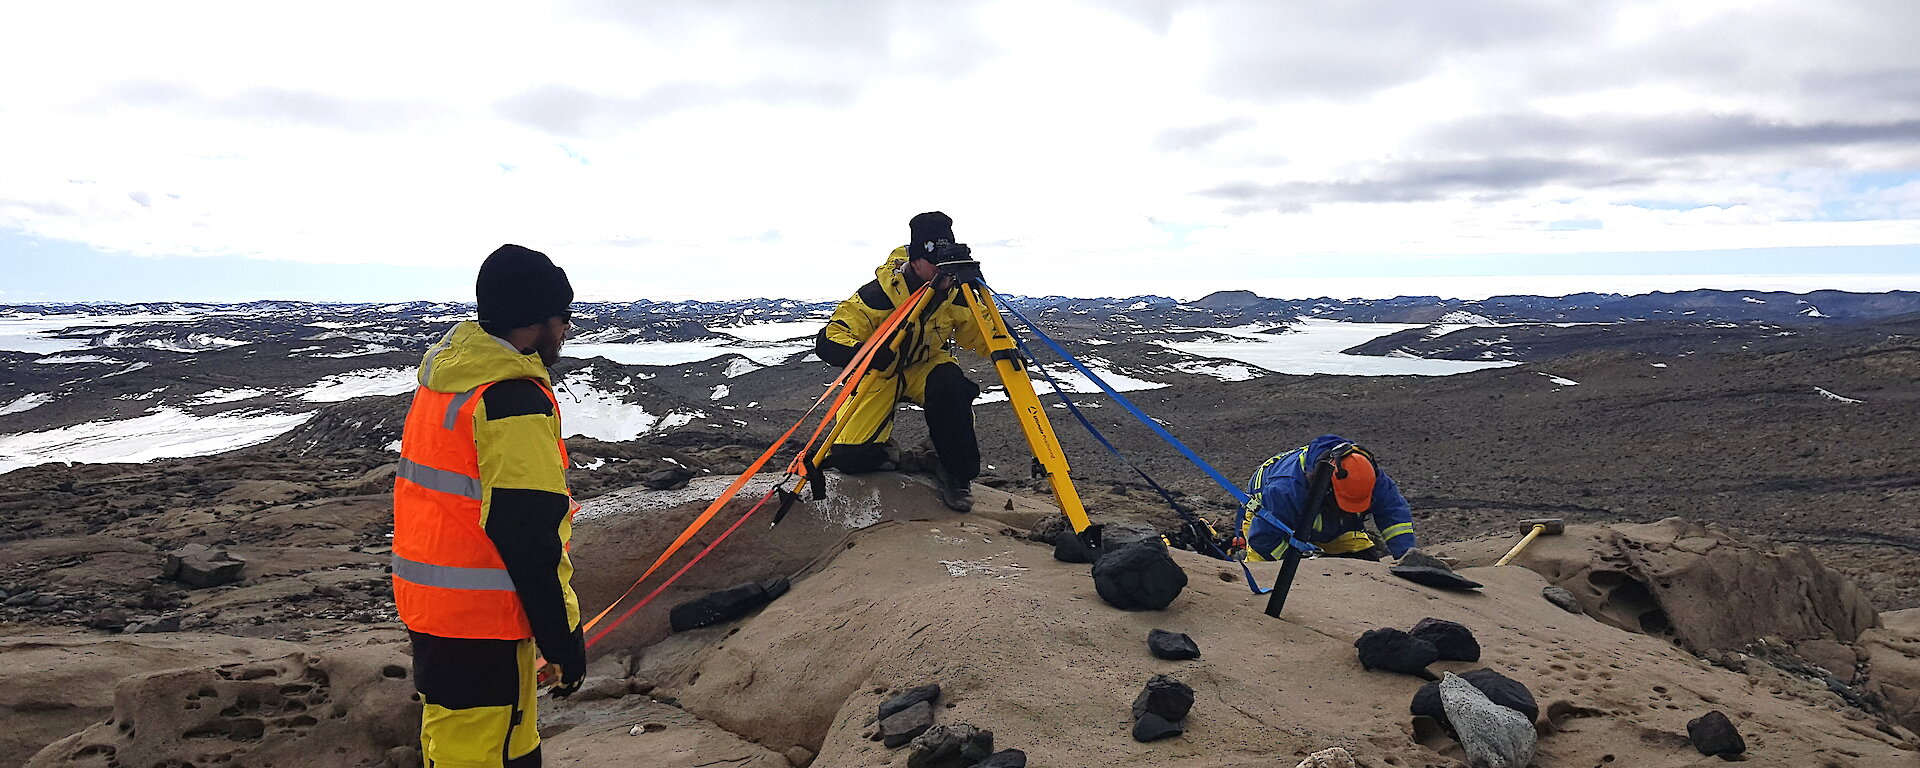 3 people with surveying equipment in a rocky landscape.